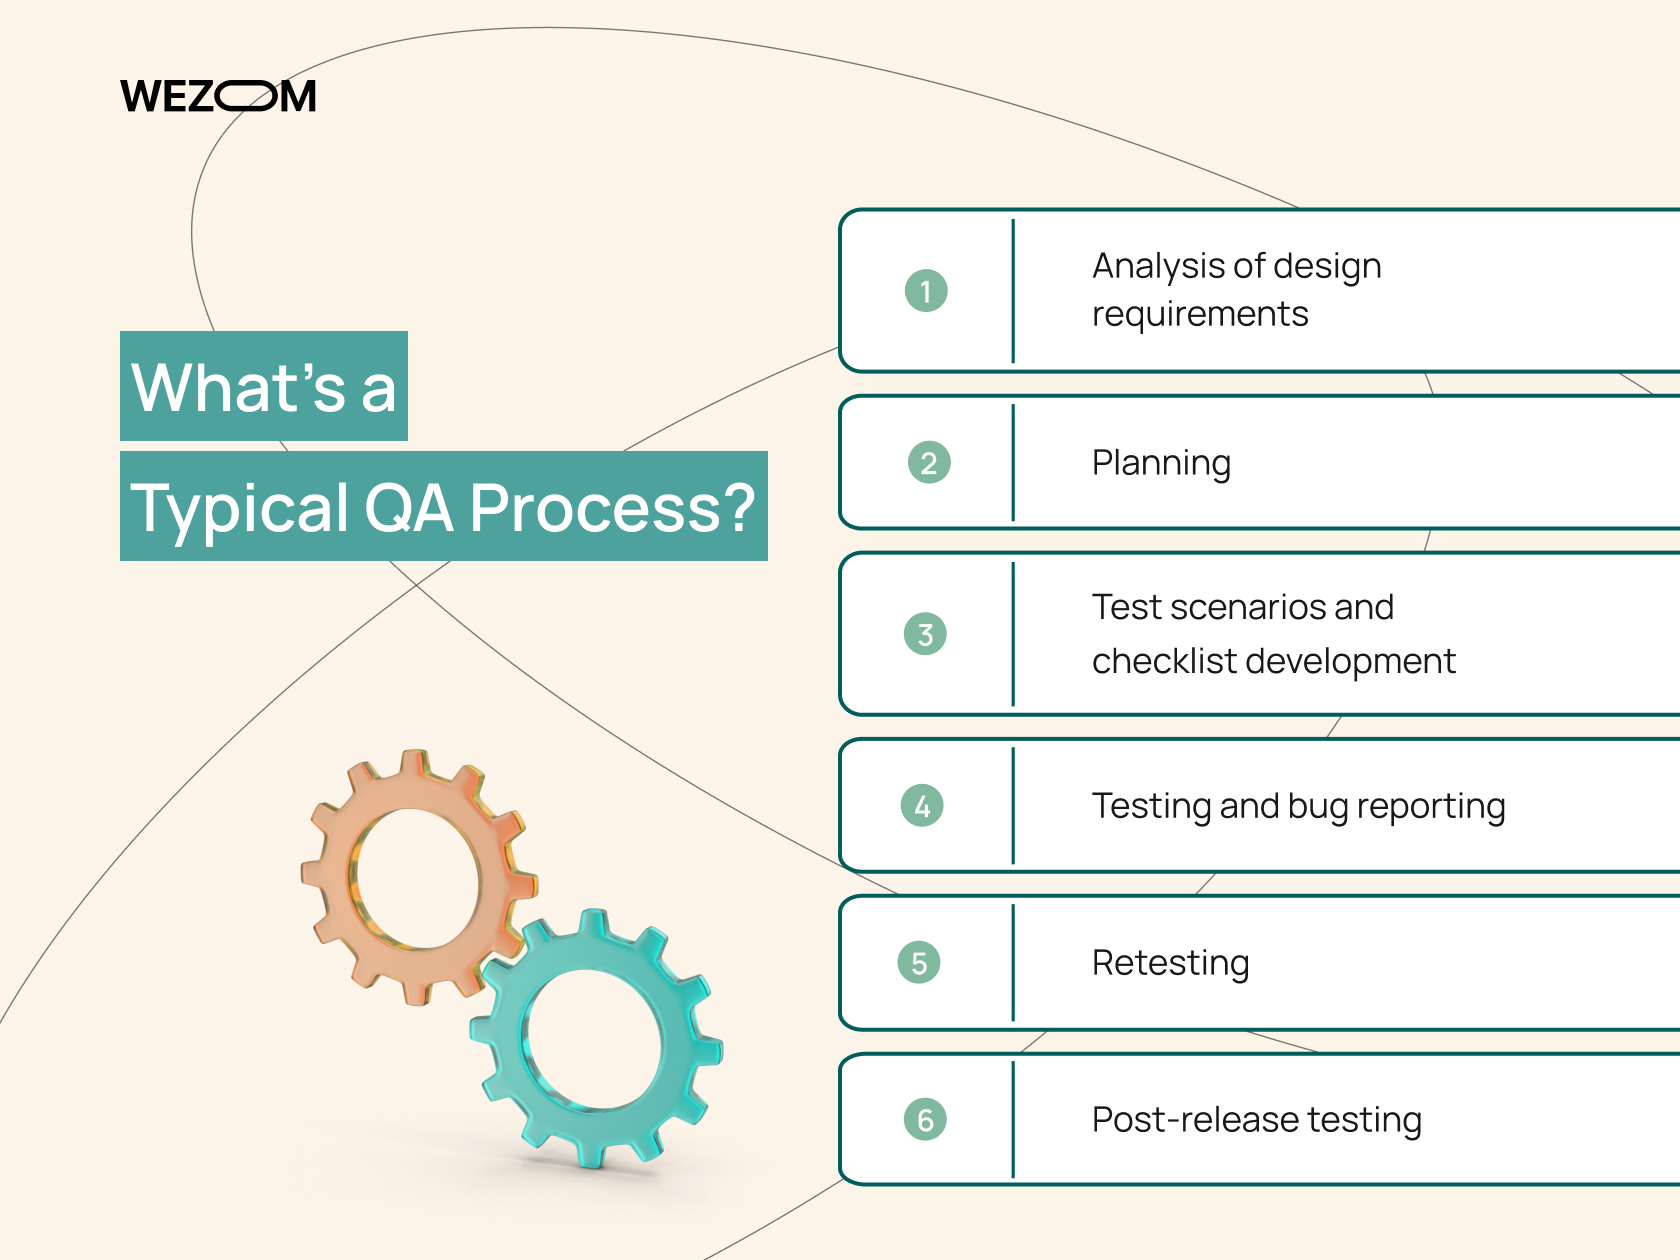 What's a Typical QA Process?